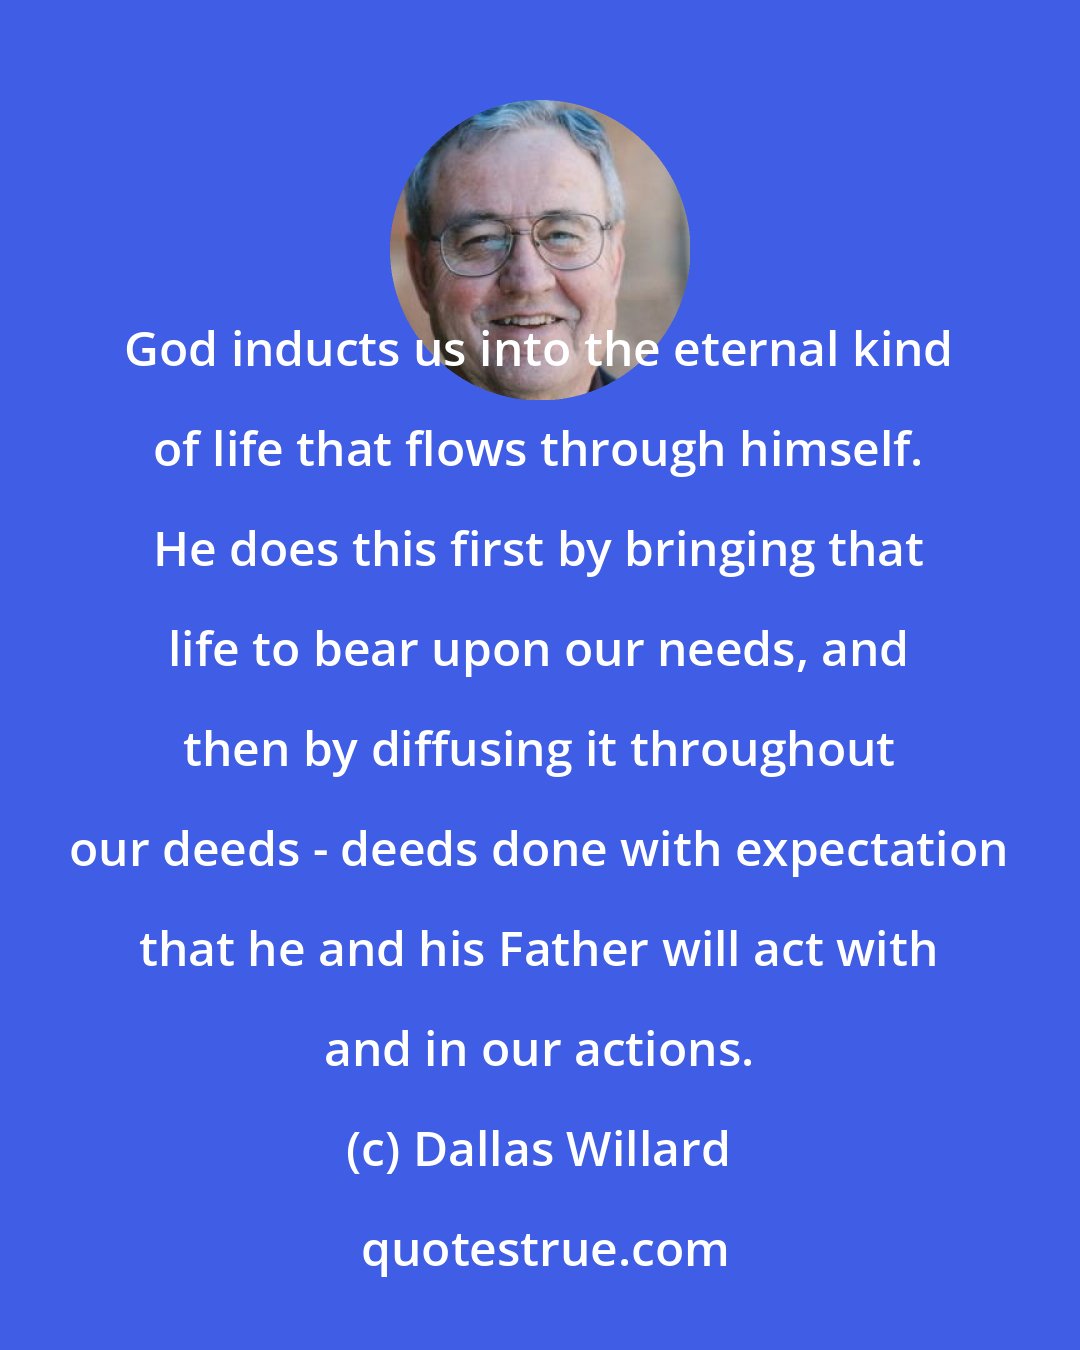 Dallas Willard: God inducts us into the eternal kind of life that flows through himself. He does this first by bringing that life to bear upon our needs, and then by diffusing it throughout our deeds - deeds done with expectation that he and his Father will act with and in our actions.